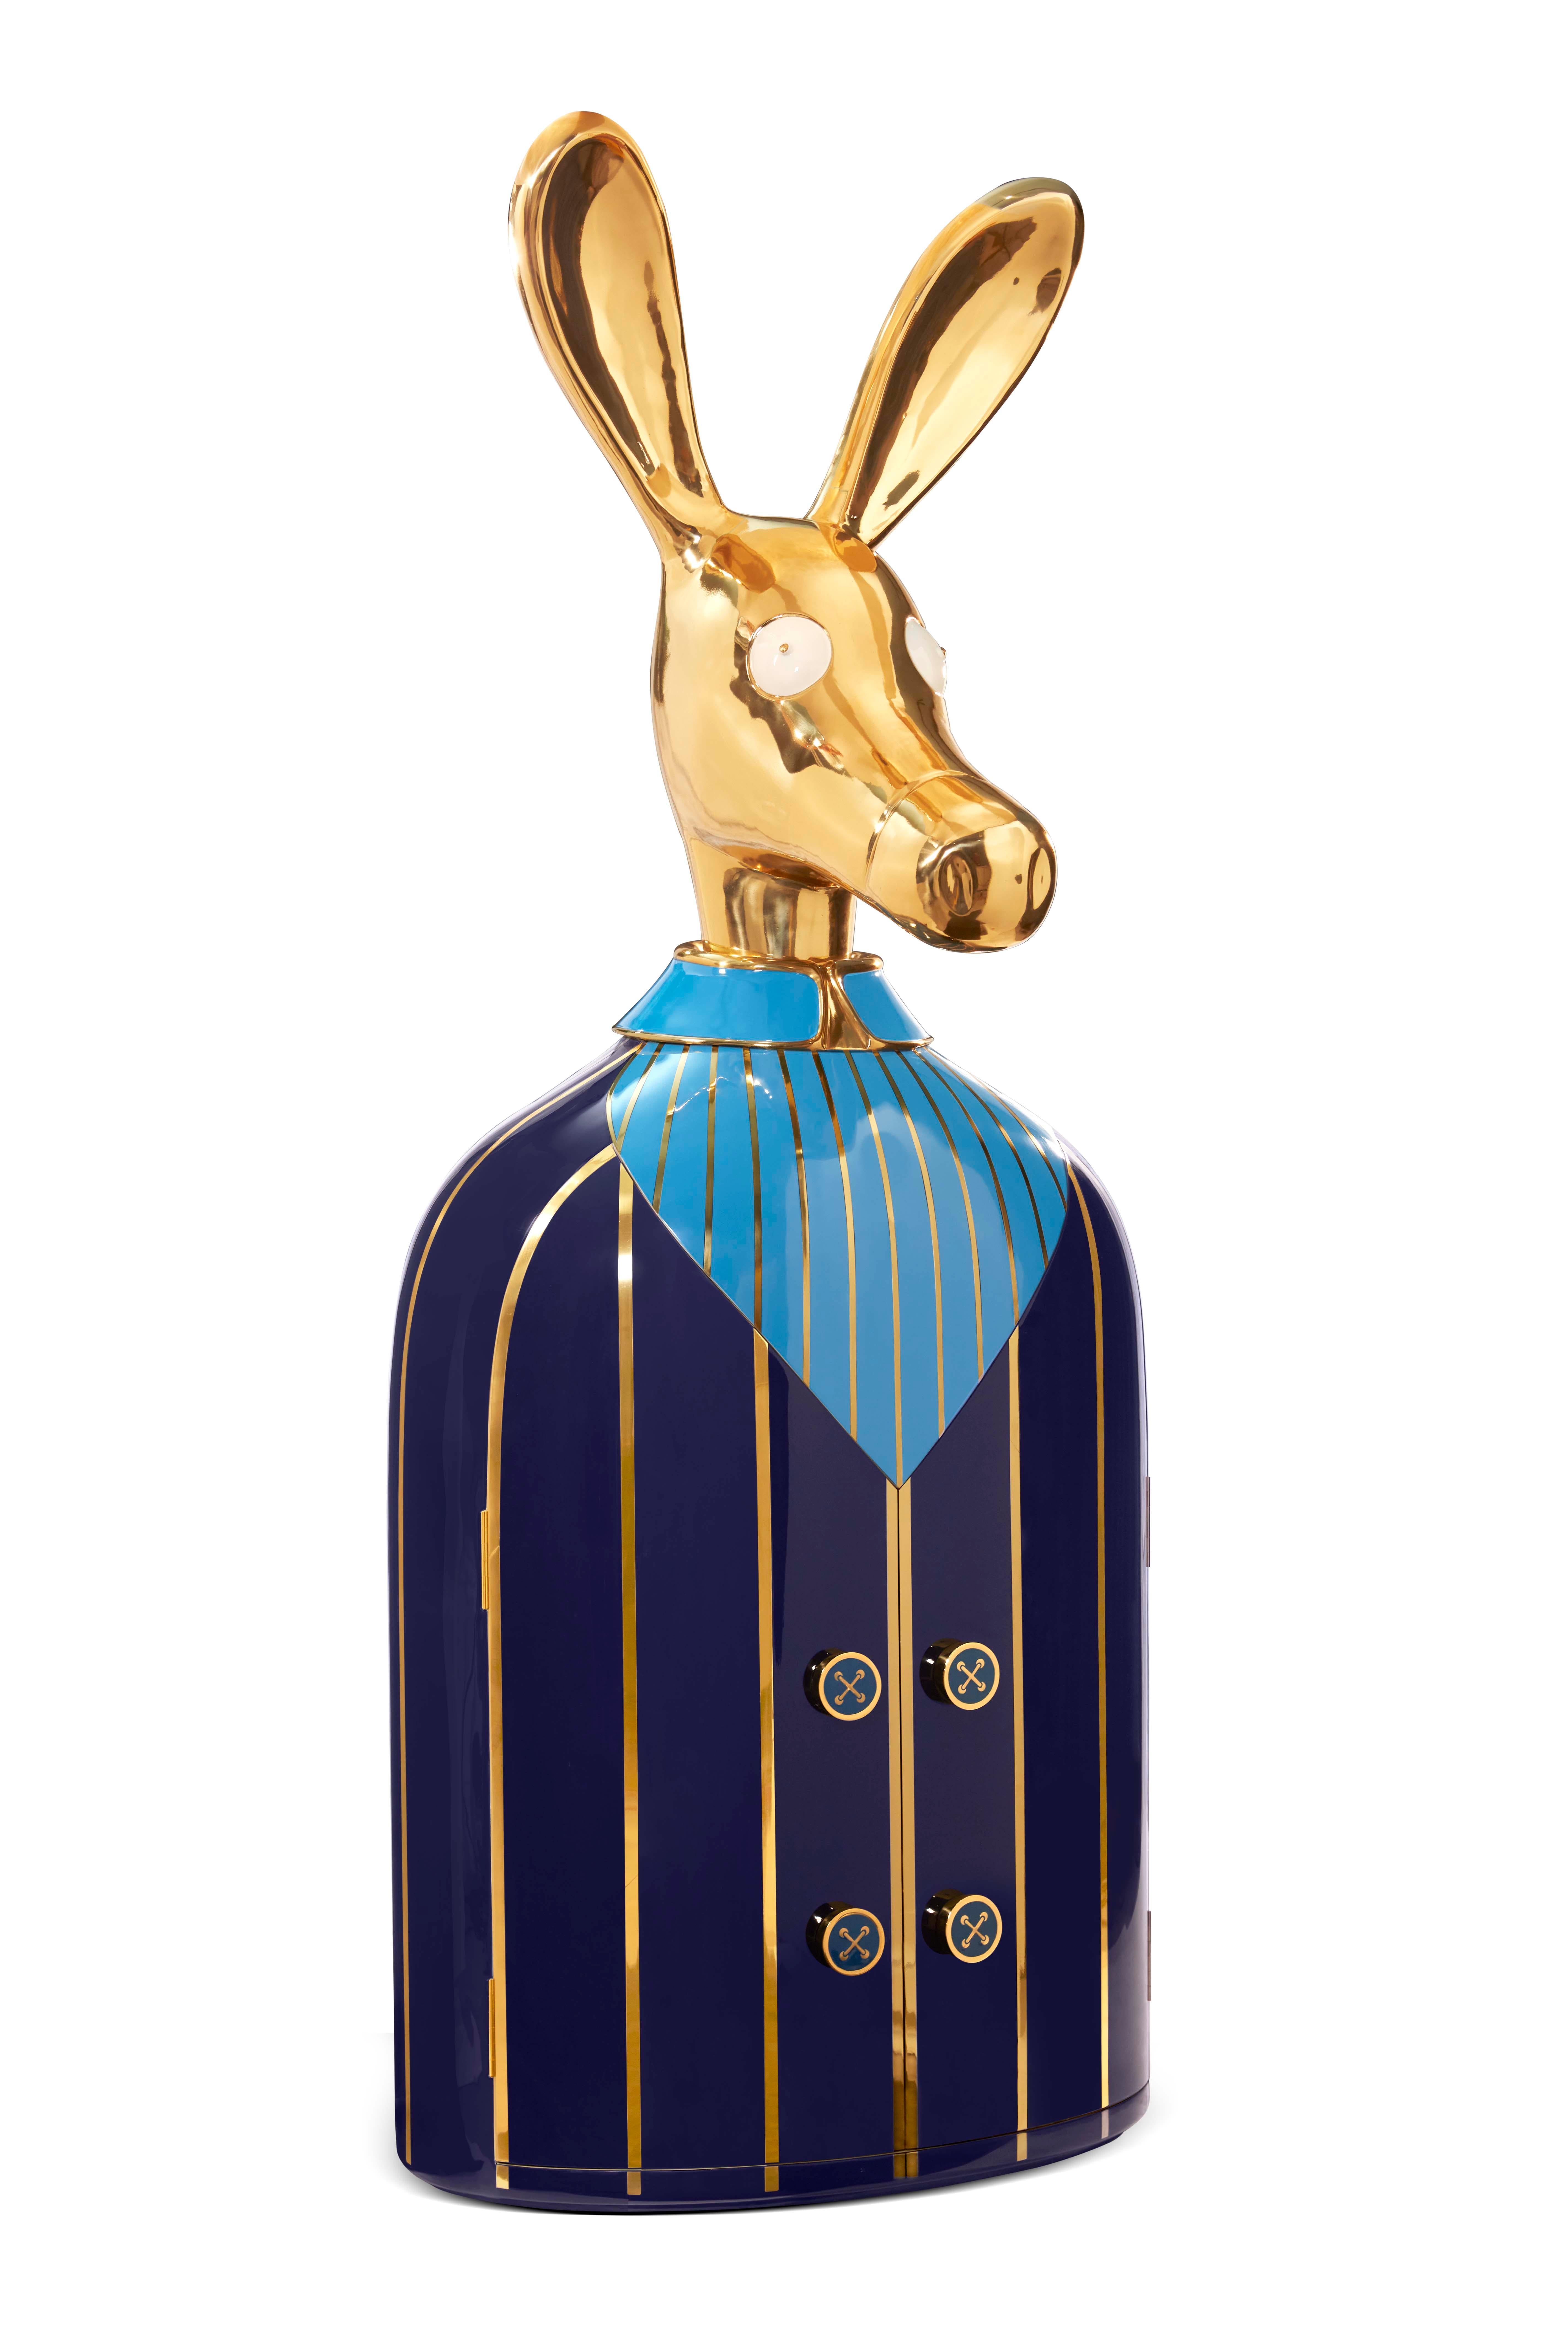 The Ciuco donkey blue bar storage cabinet with brass inlay by Matteo Cibic has a large brass donkey head that sits atop a brass and resin lined blue shirt. The buttons are knobs to open the tuxedo revealing a spacious cabinet within. A sculptural,